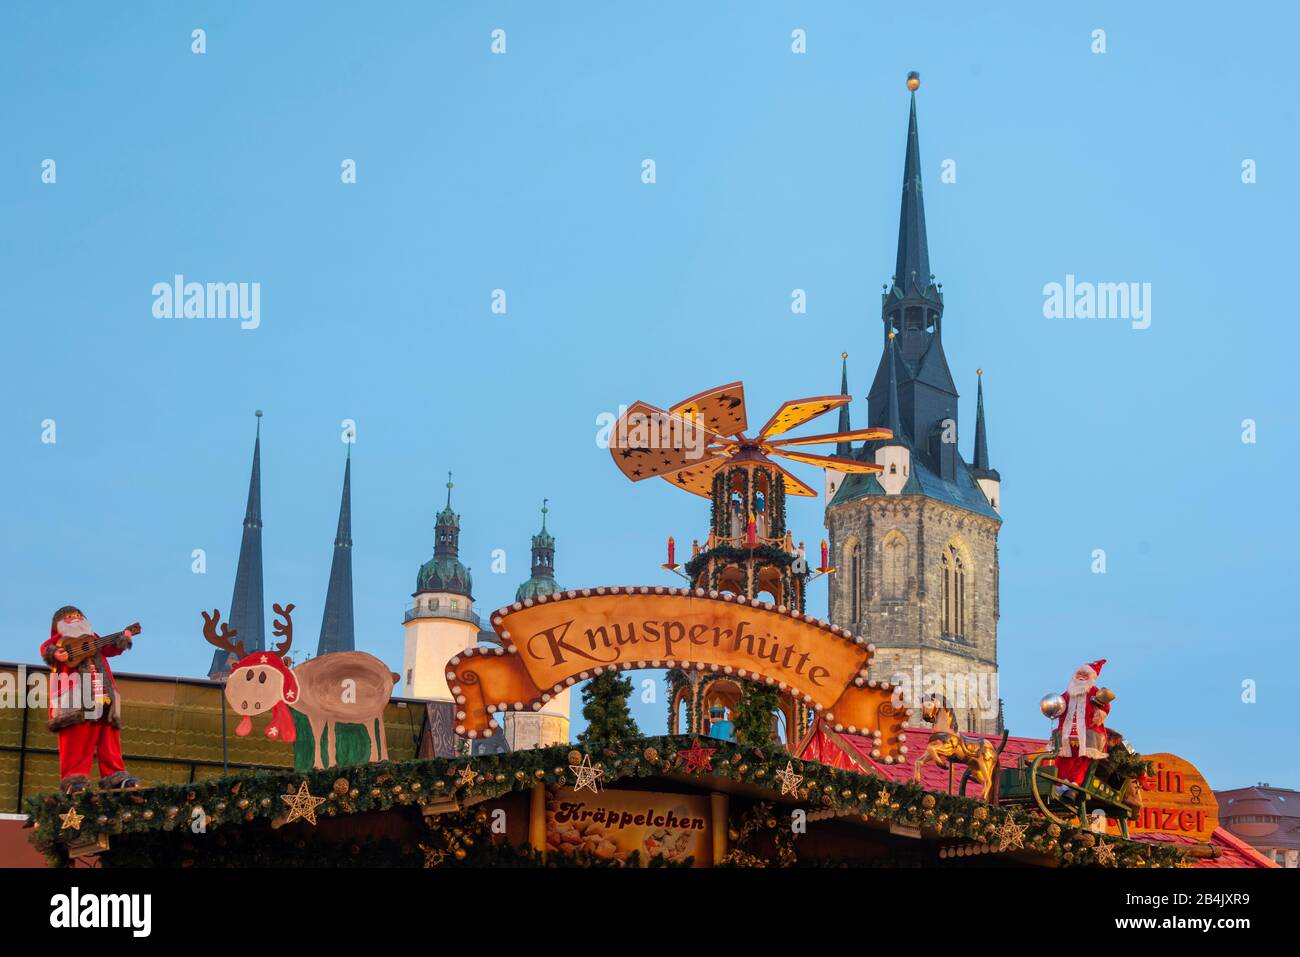 Germany, Saxony-Anhalt, Halle, looking at a stall at the Christmas market of Halle. In the background the market church Our Lady and the Red Tower. Stock Photo